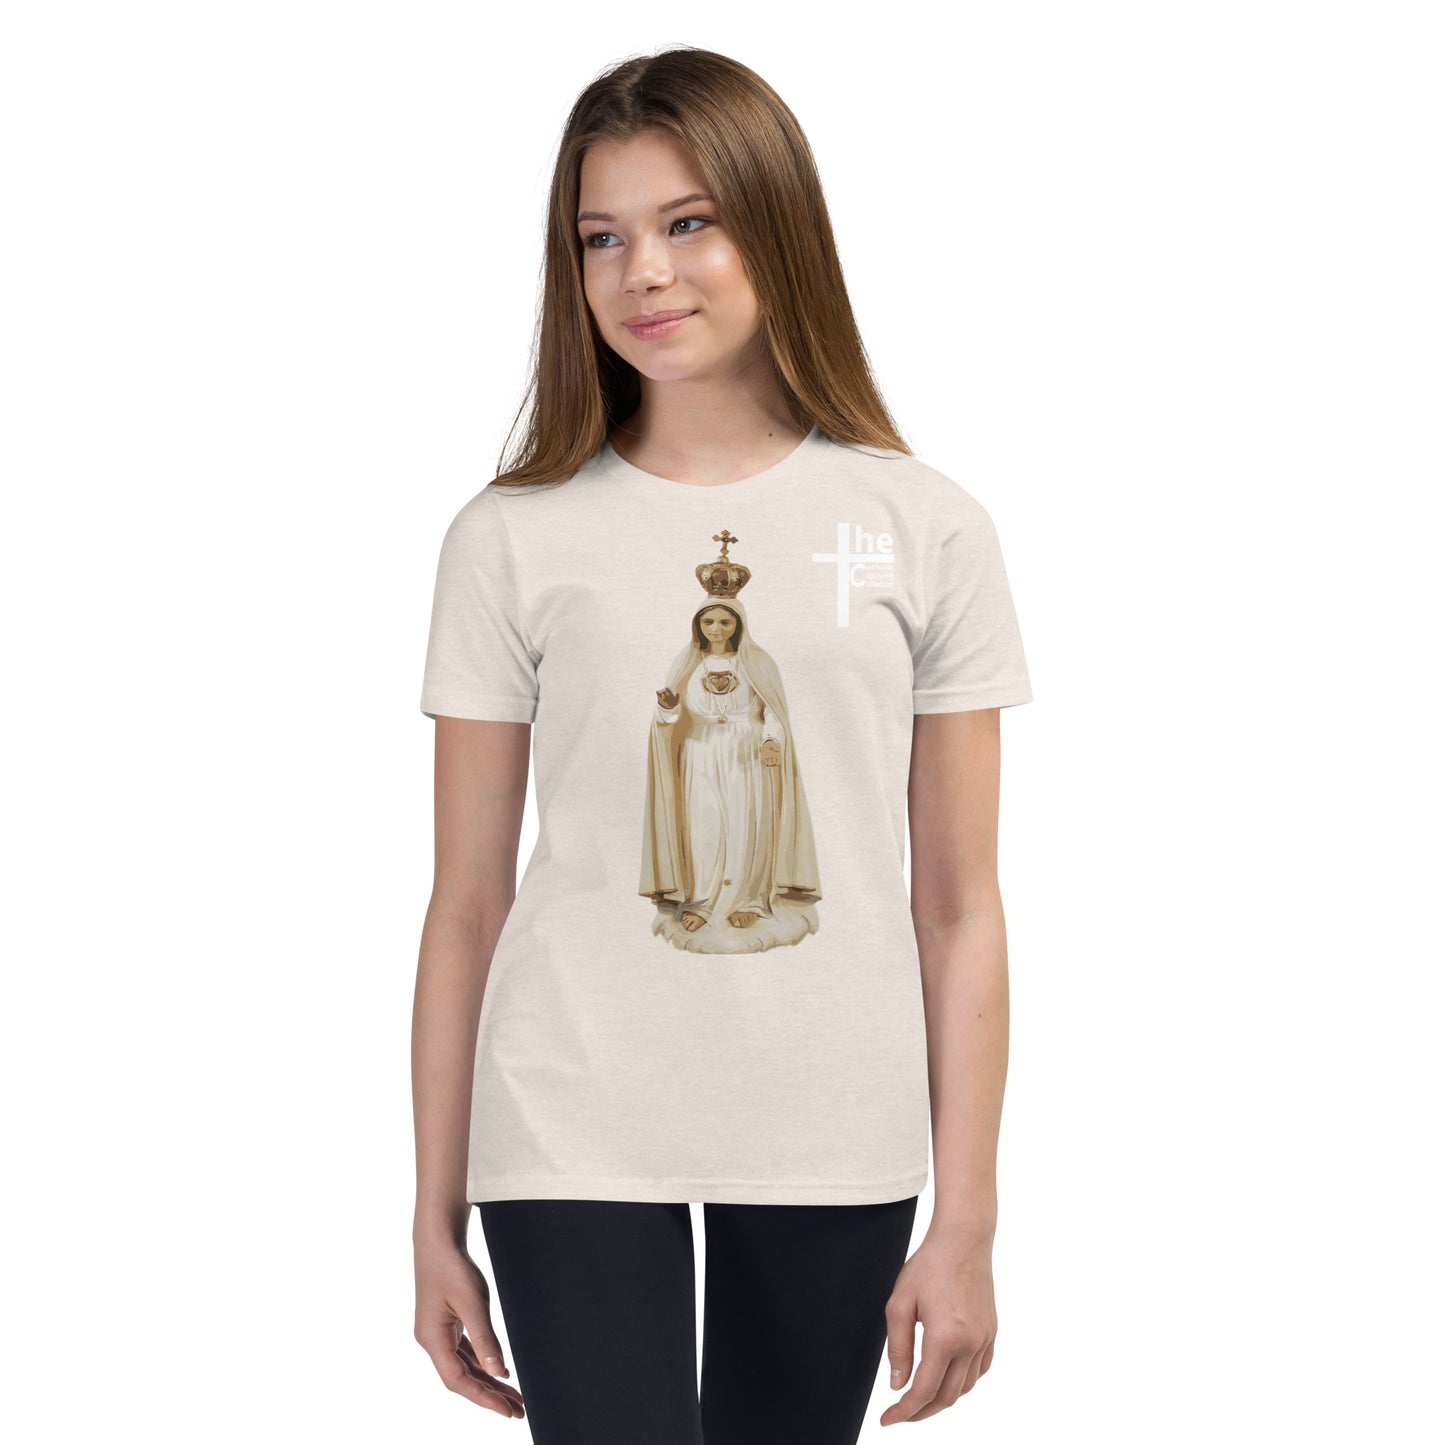 Our Lady of Fatima Children's t-Shirt